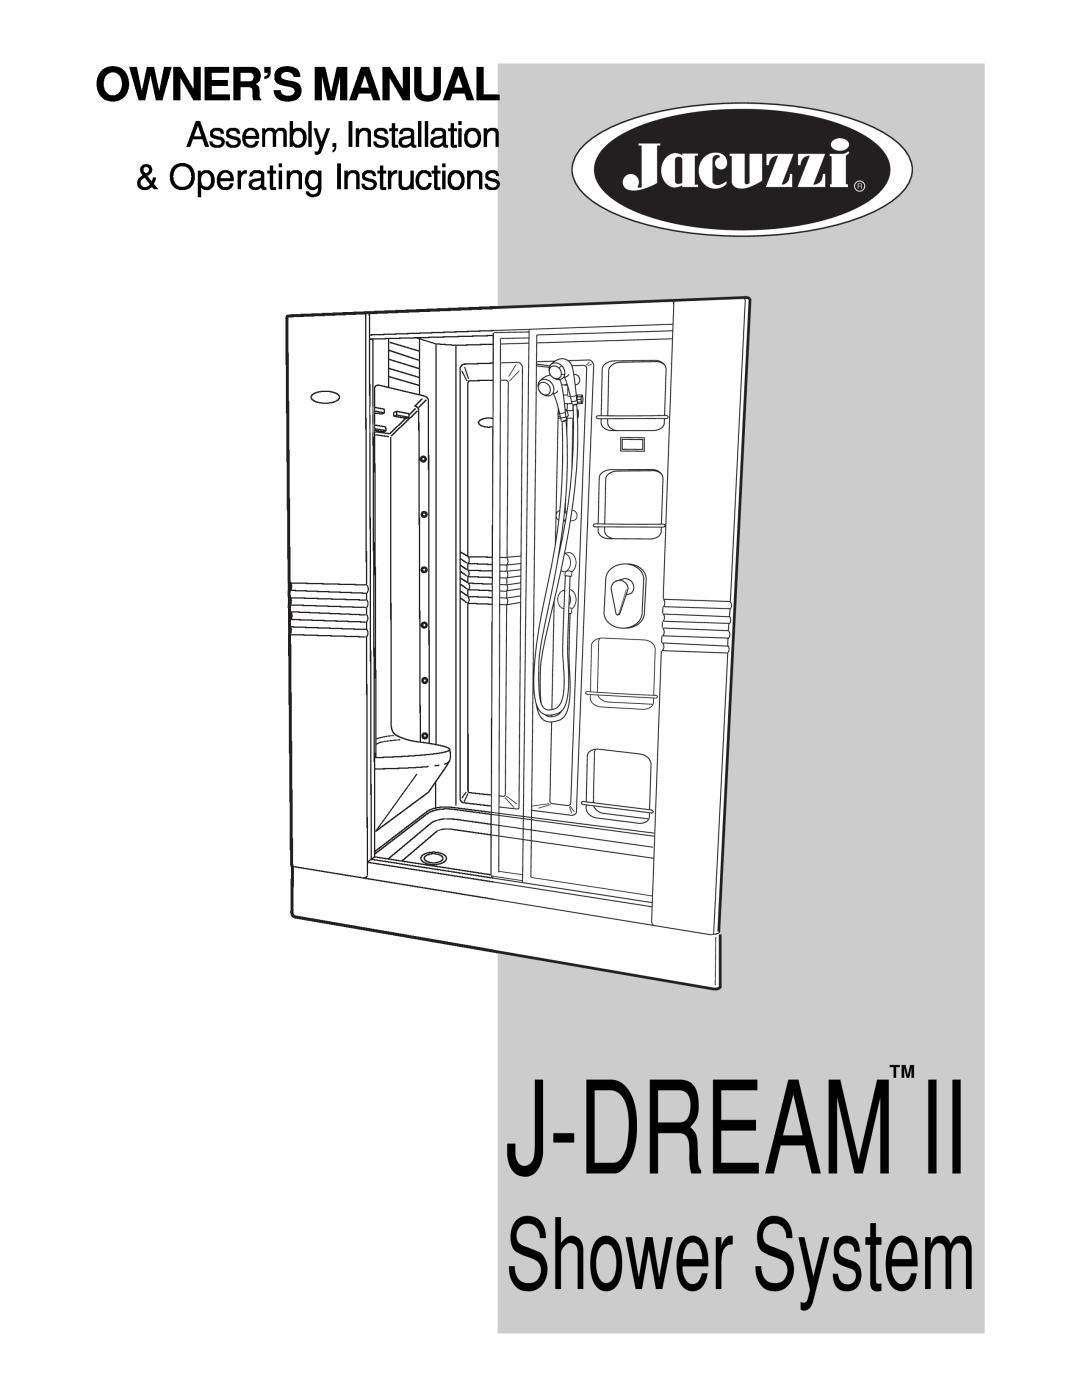 Jacuzzi J-DREAM II owner manual J-Dreamii, Shower System, Assembly, Installation & Operating Instructions 